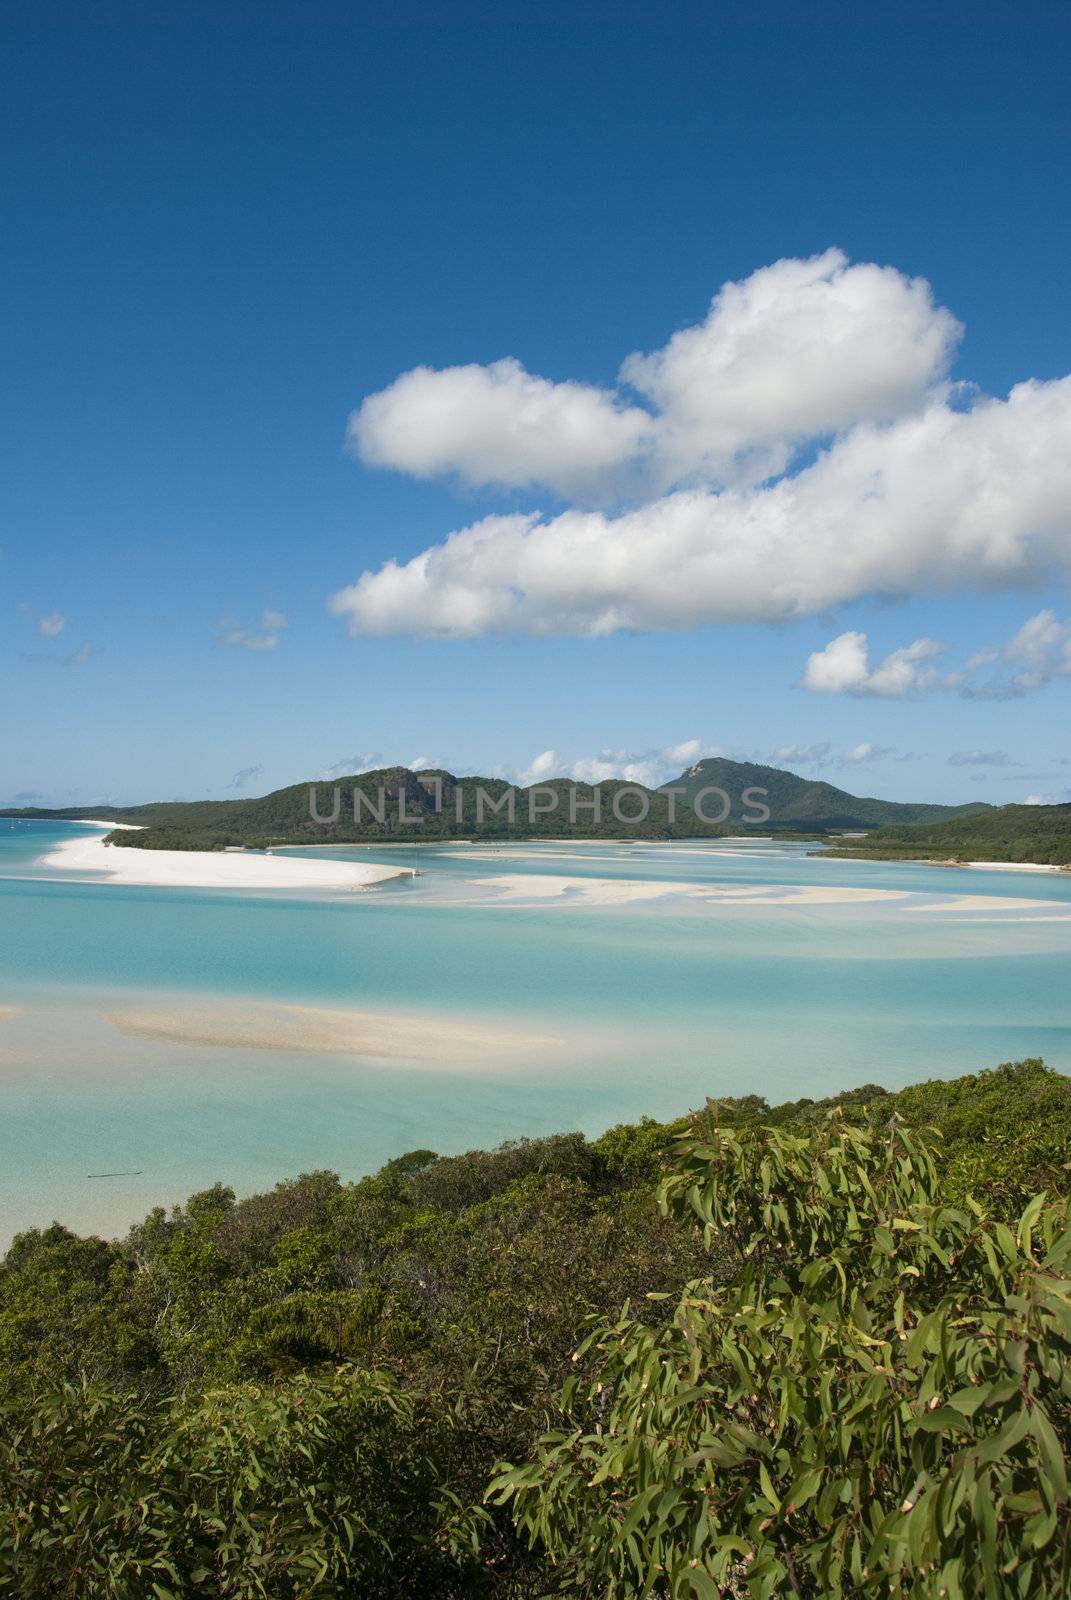 A stunning view of Whitehaven Beach in the Whitsunday Islands